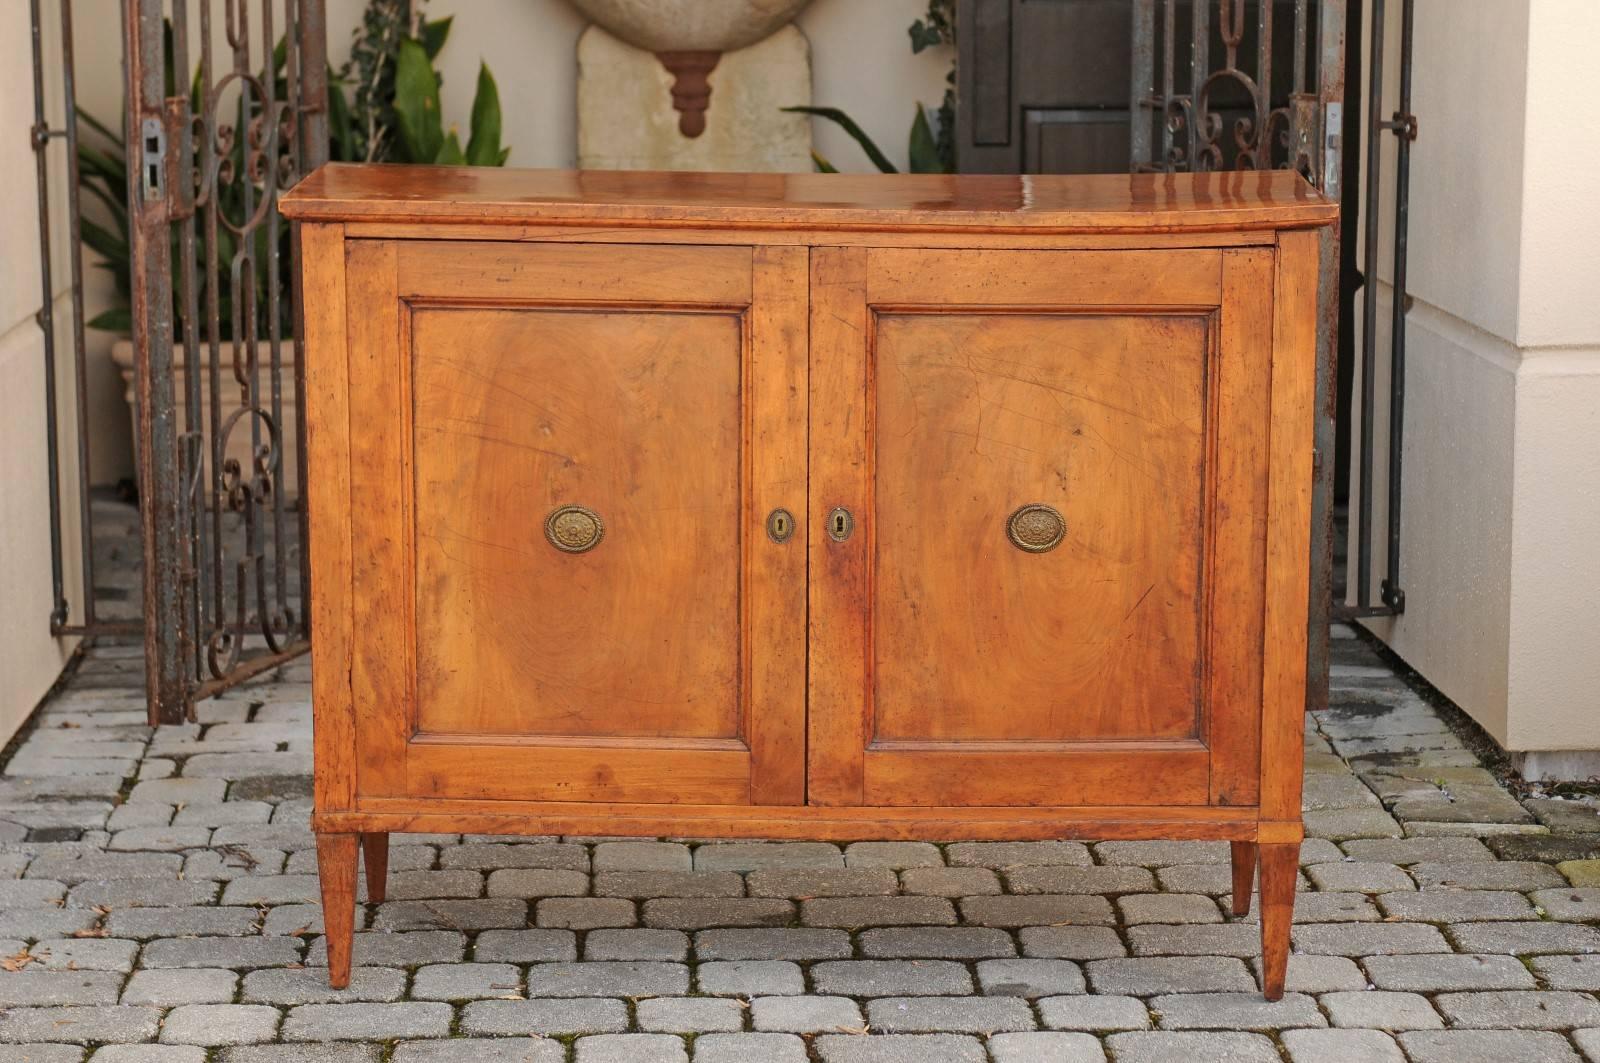 A French neoclassical period walnut two-door buffet with inner drawers and shelves from the early 19th century. Delve into the understated elegance of the early 19th century with this French neoclassical period walnut buffet, a piece that